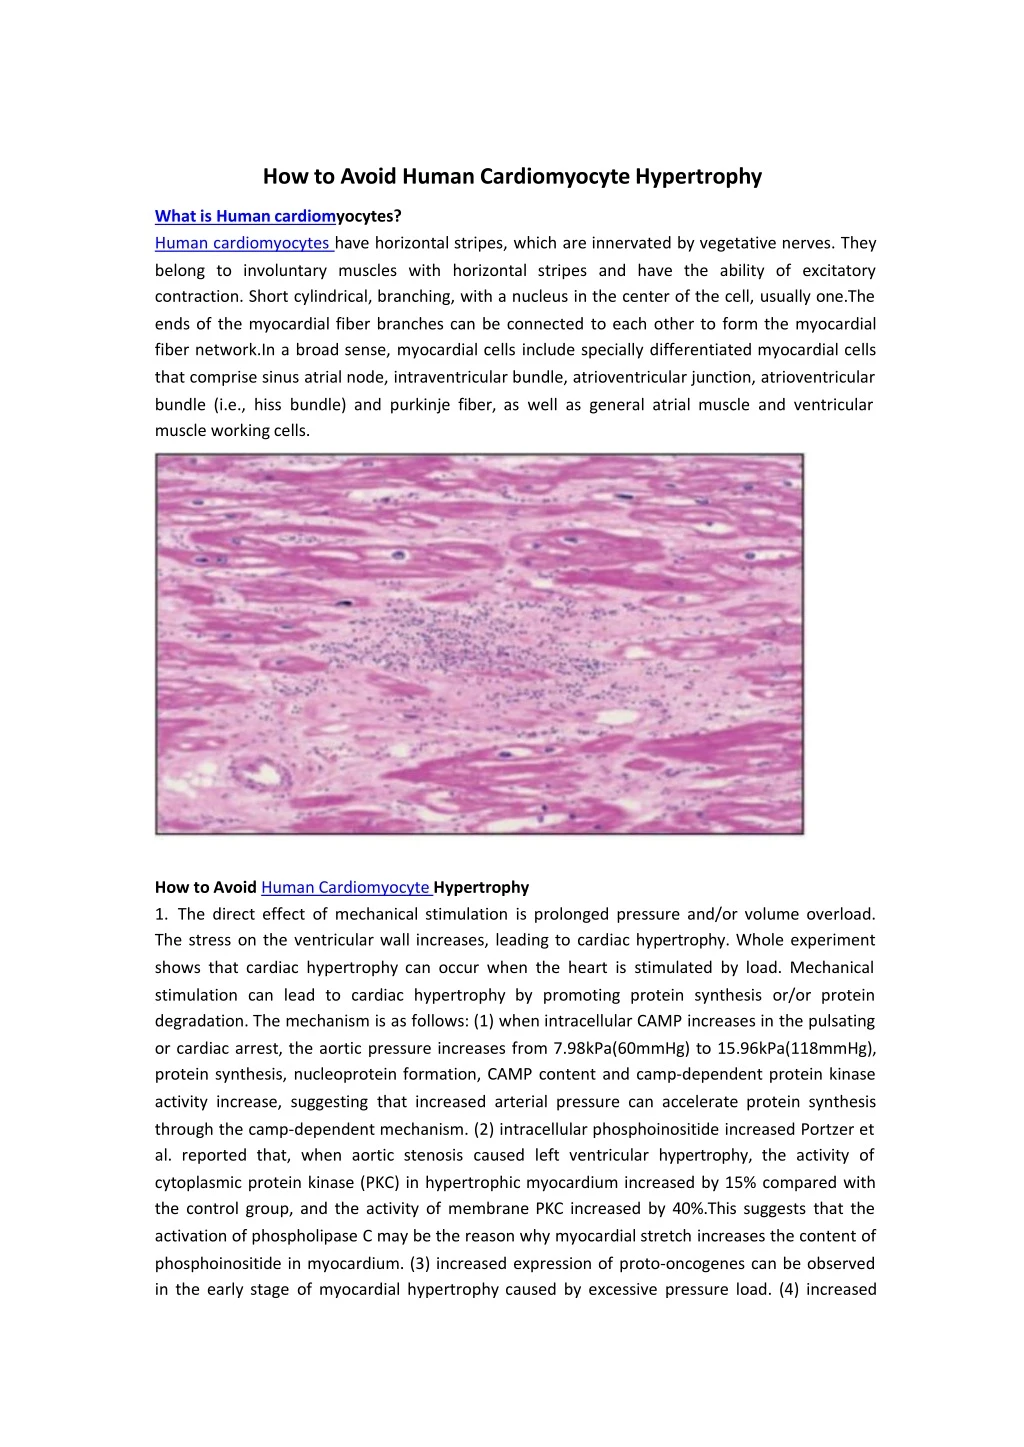 how to avoid human cardiomyocyte hypertrophy